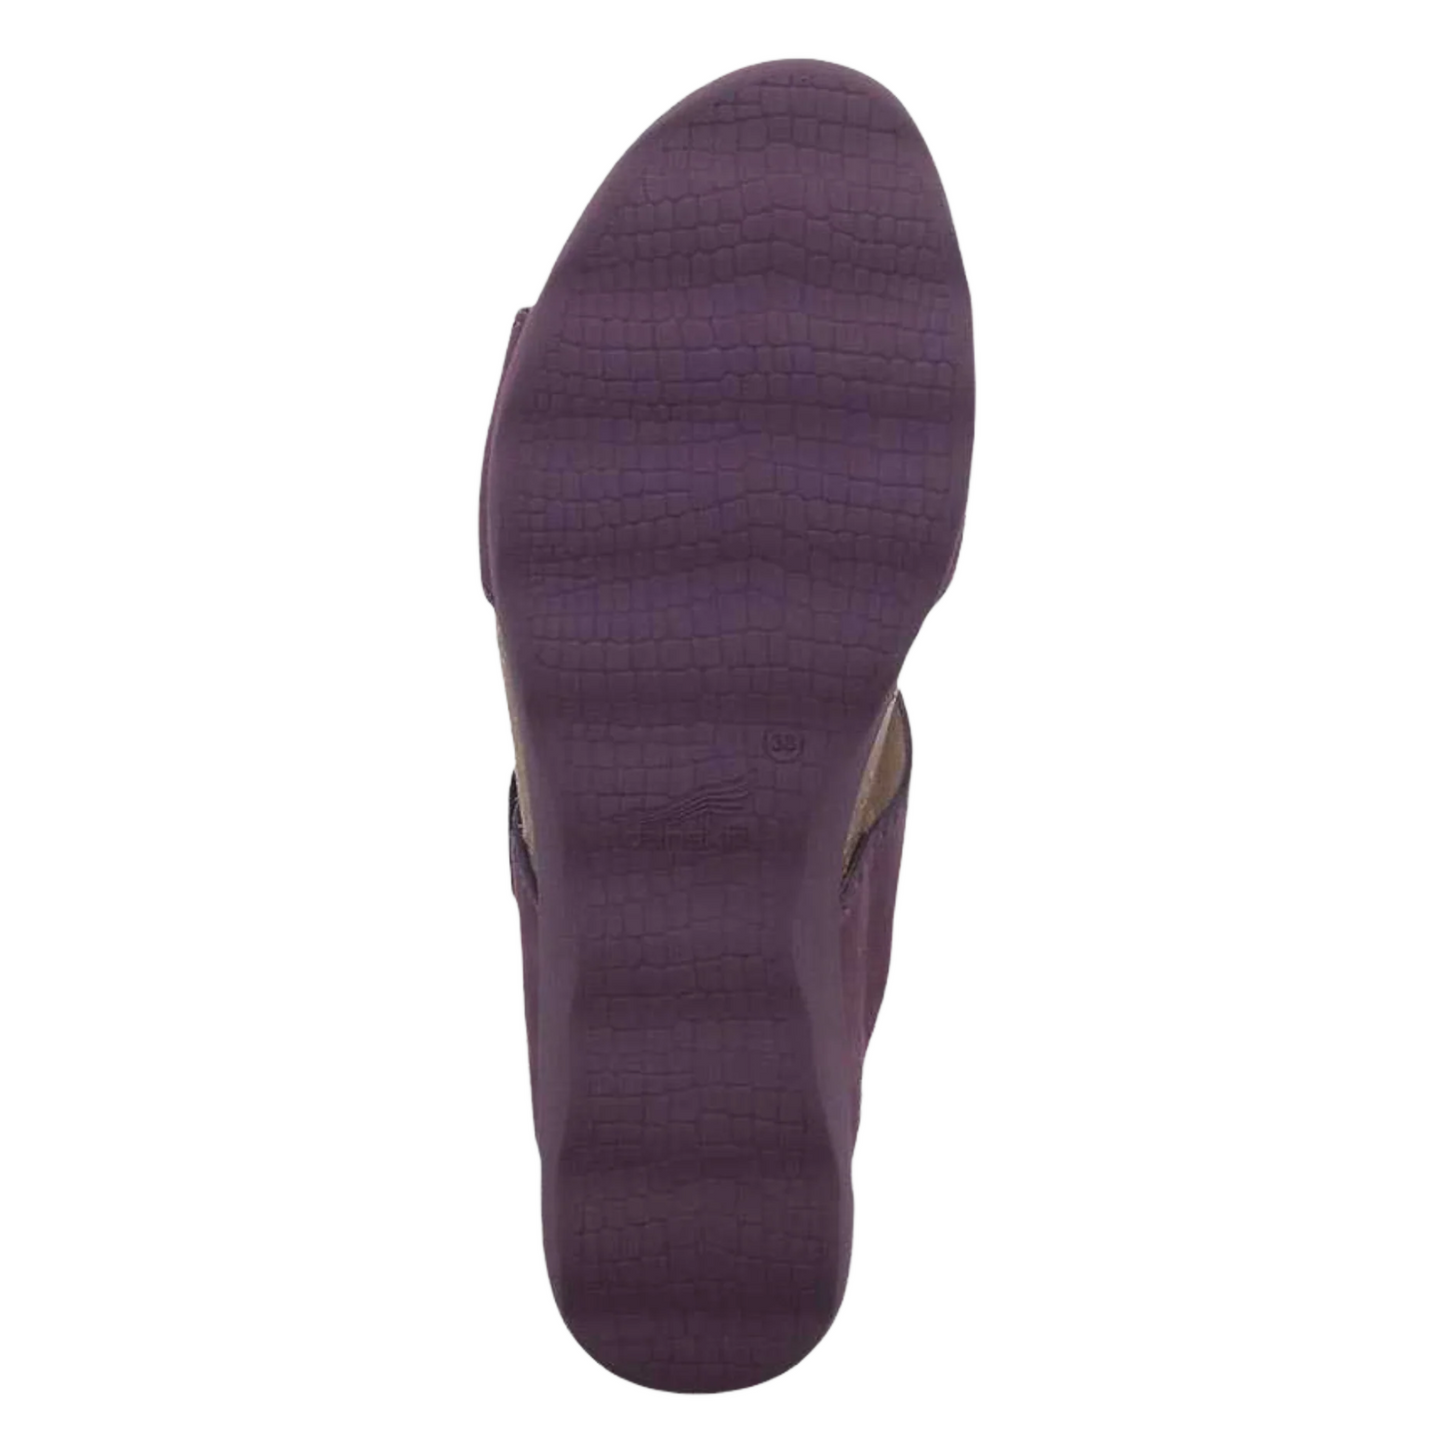 The bottom of a purple sandal is pictured from the bottom showing the ribbed/wavy crocodile textured outsole.